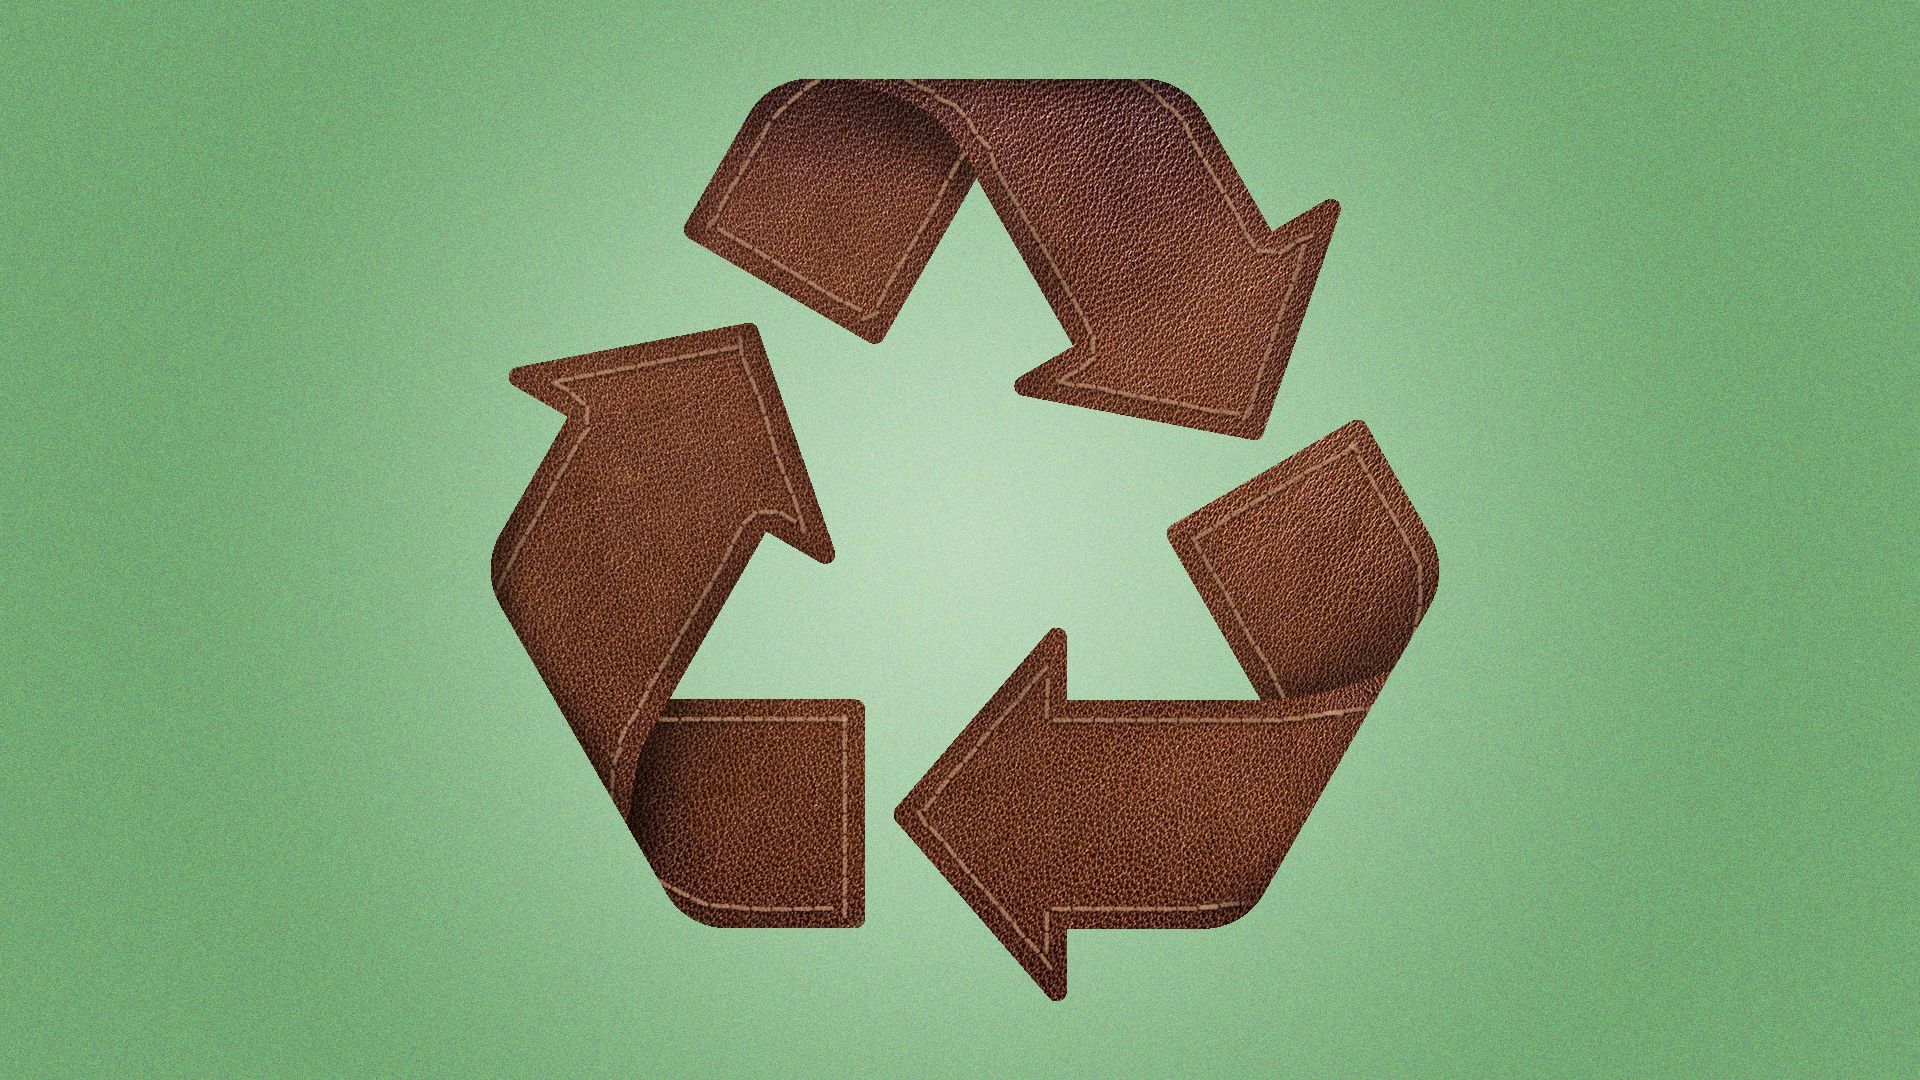 a recycling symbol made out of stitched pieces of leather